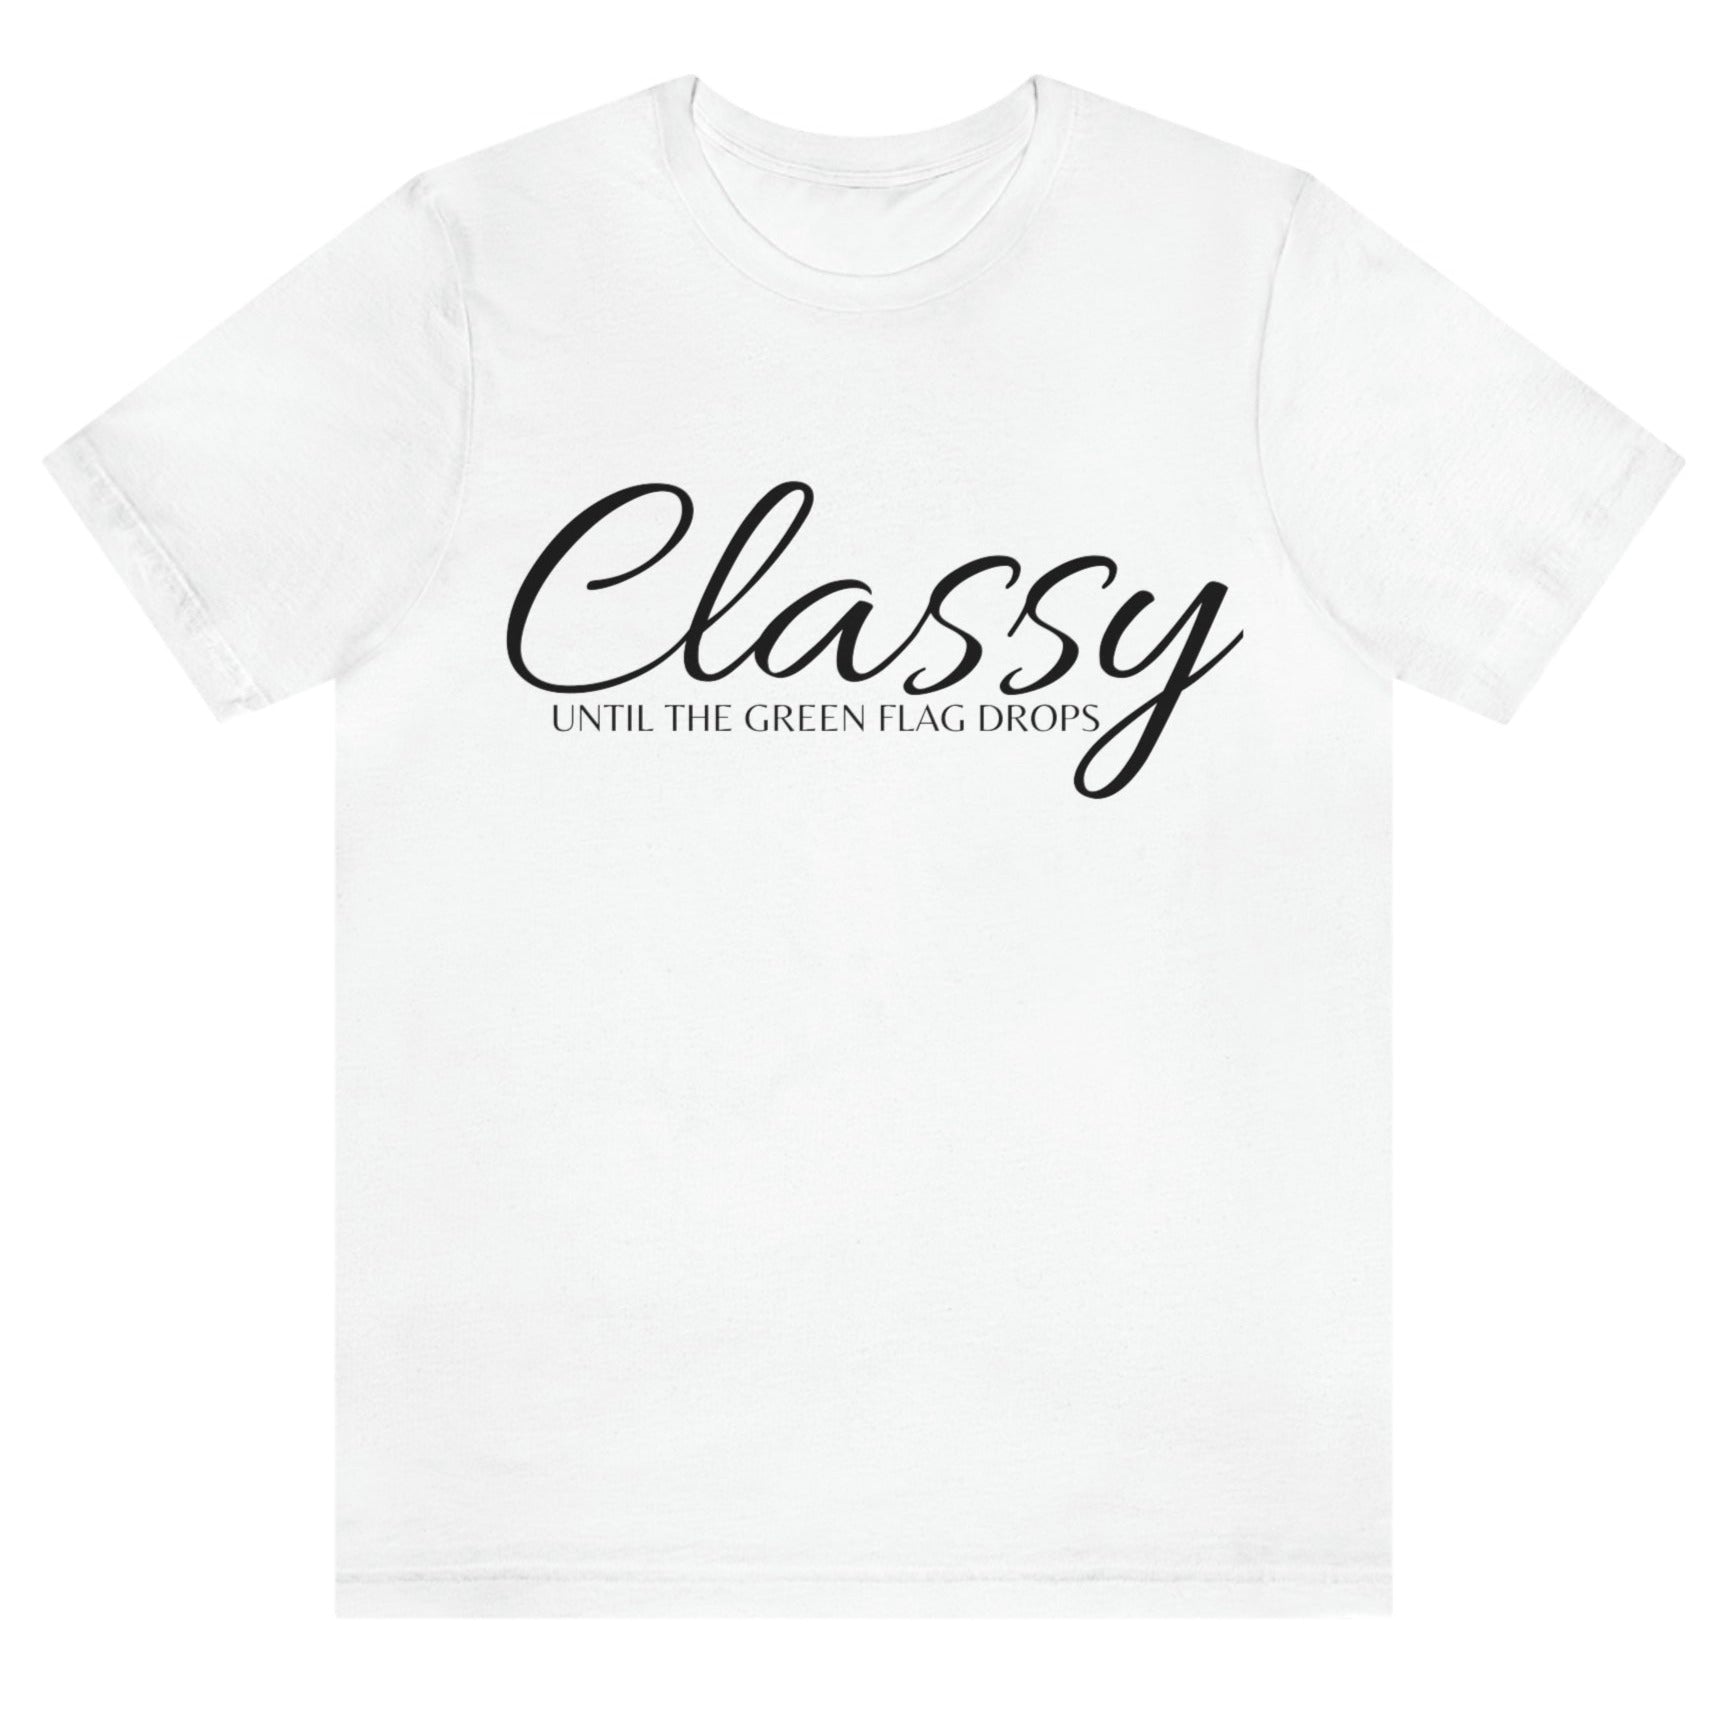 classy-until-the-green-flag-drops-white-t-shirt-racing-womens